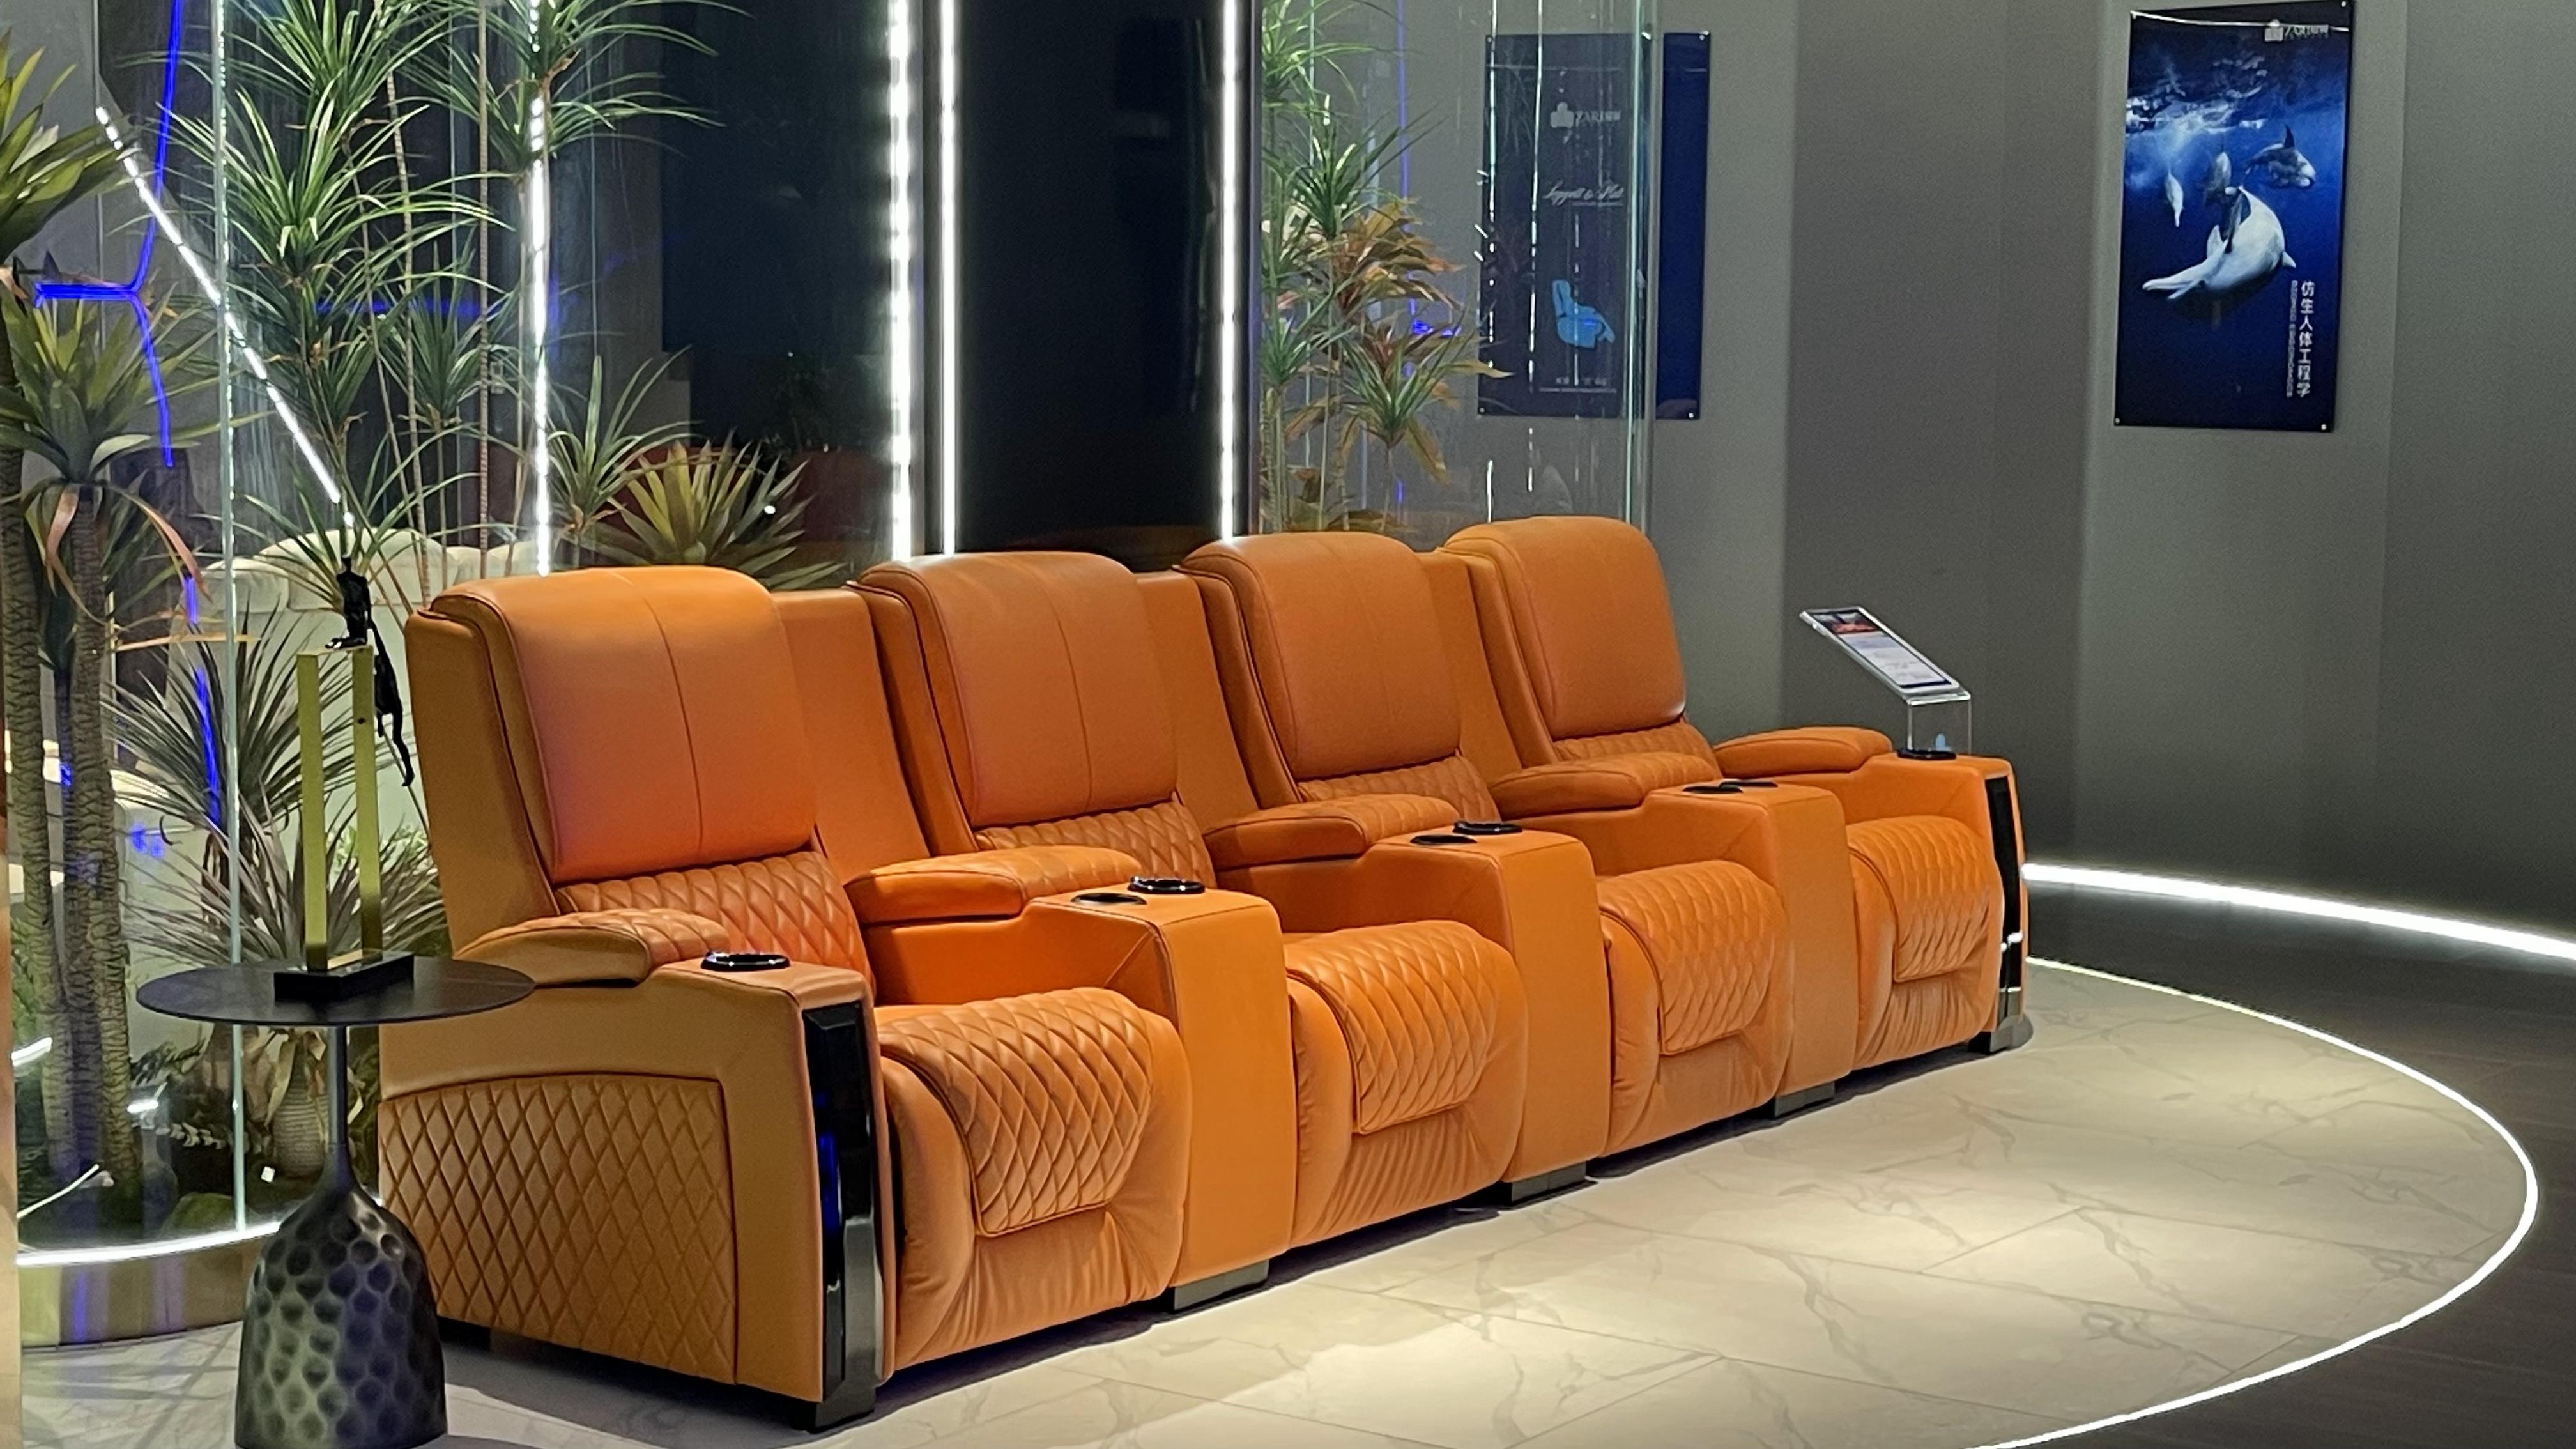 The Advantages of Leather Home Theater Sofas: Durability, Easy Maintenance, and Luxurious Feel